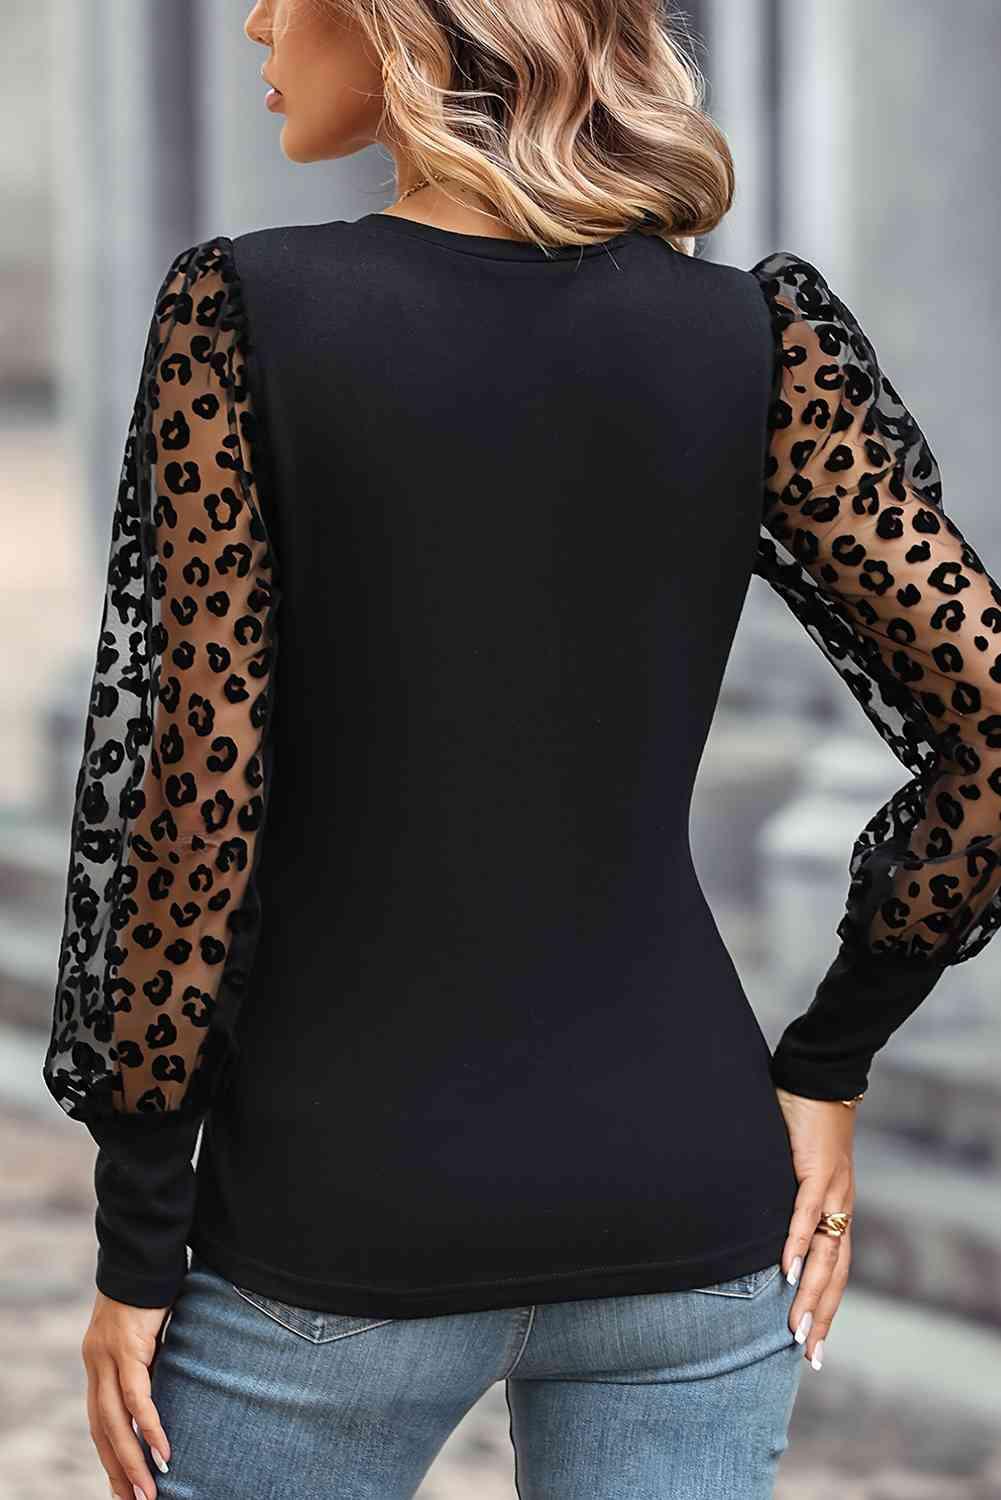 a woman wearing a black top with leopard print sleeves